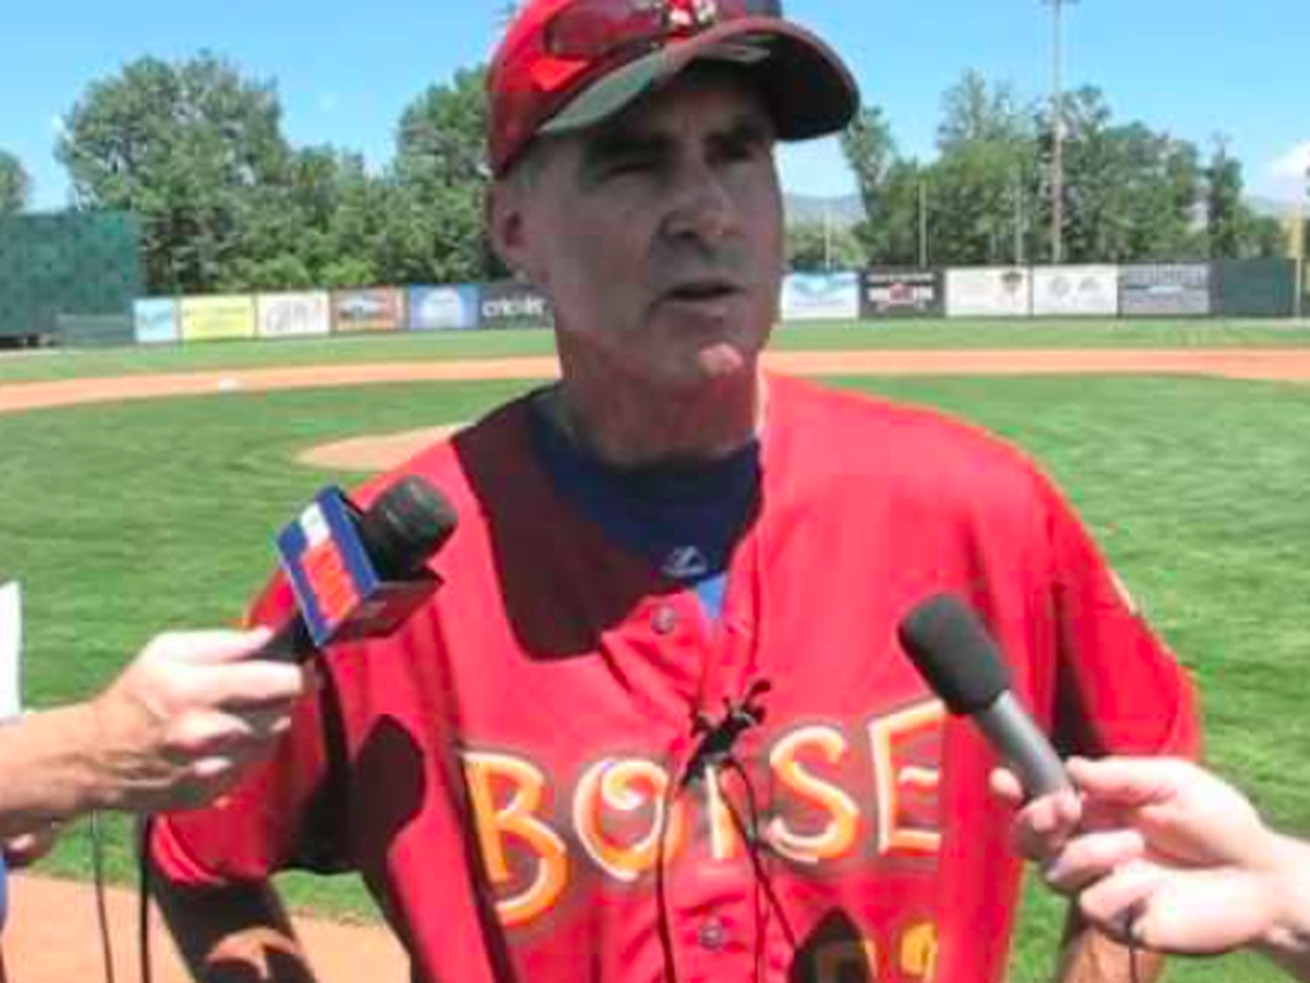 Bill Buckner during a TV interview as he begins the 2012 season as Boise Hawks hitting coach in the Cubs’ organization.